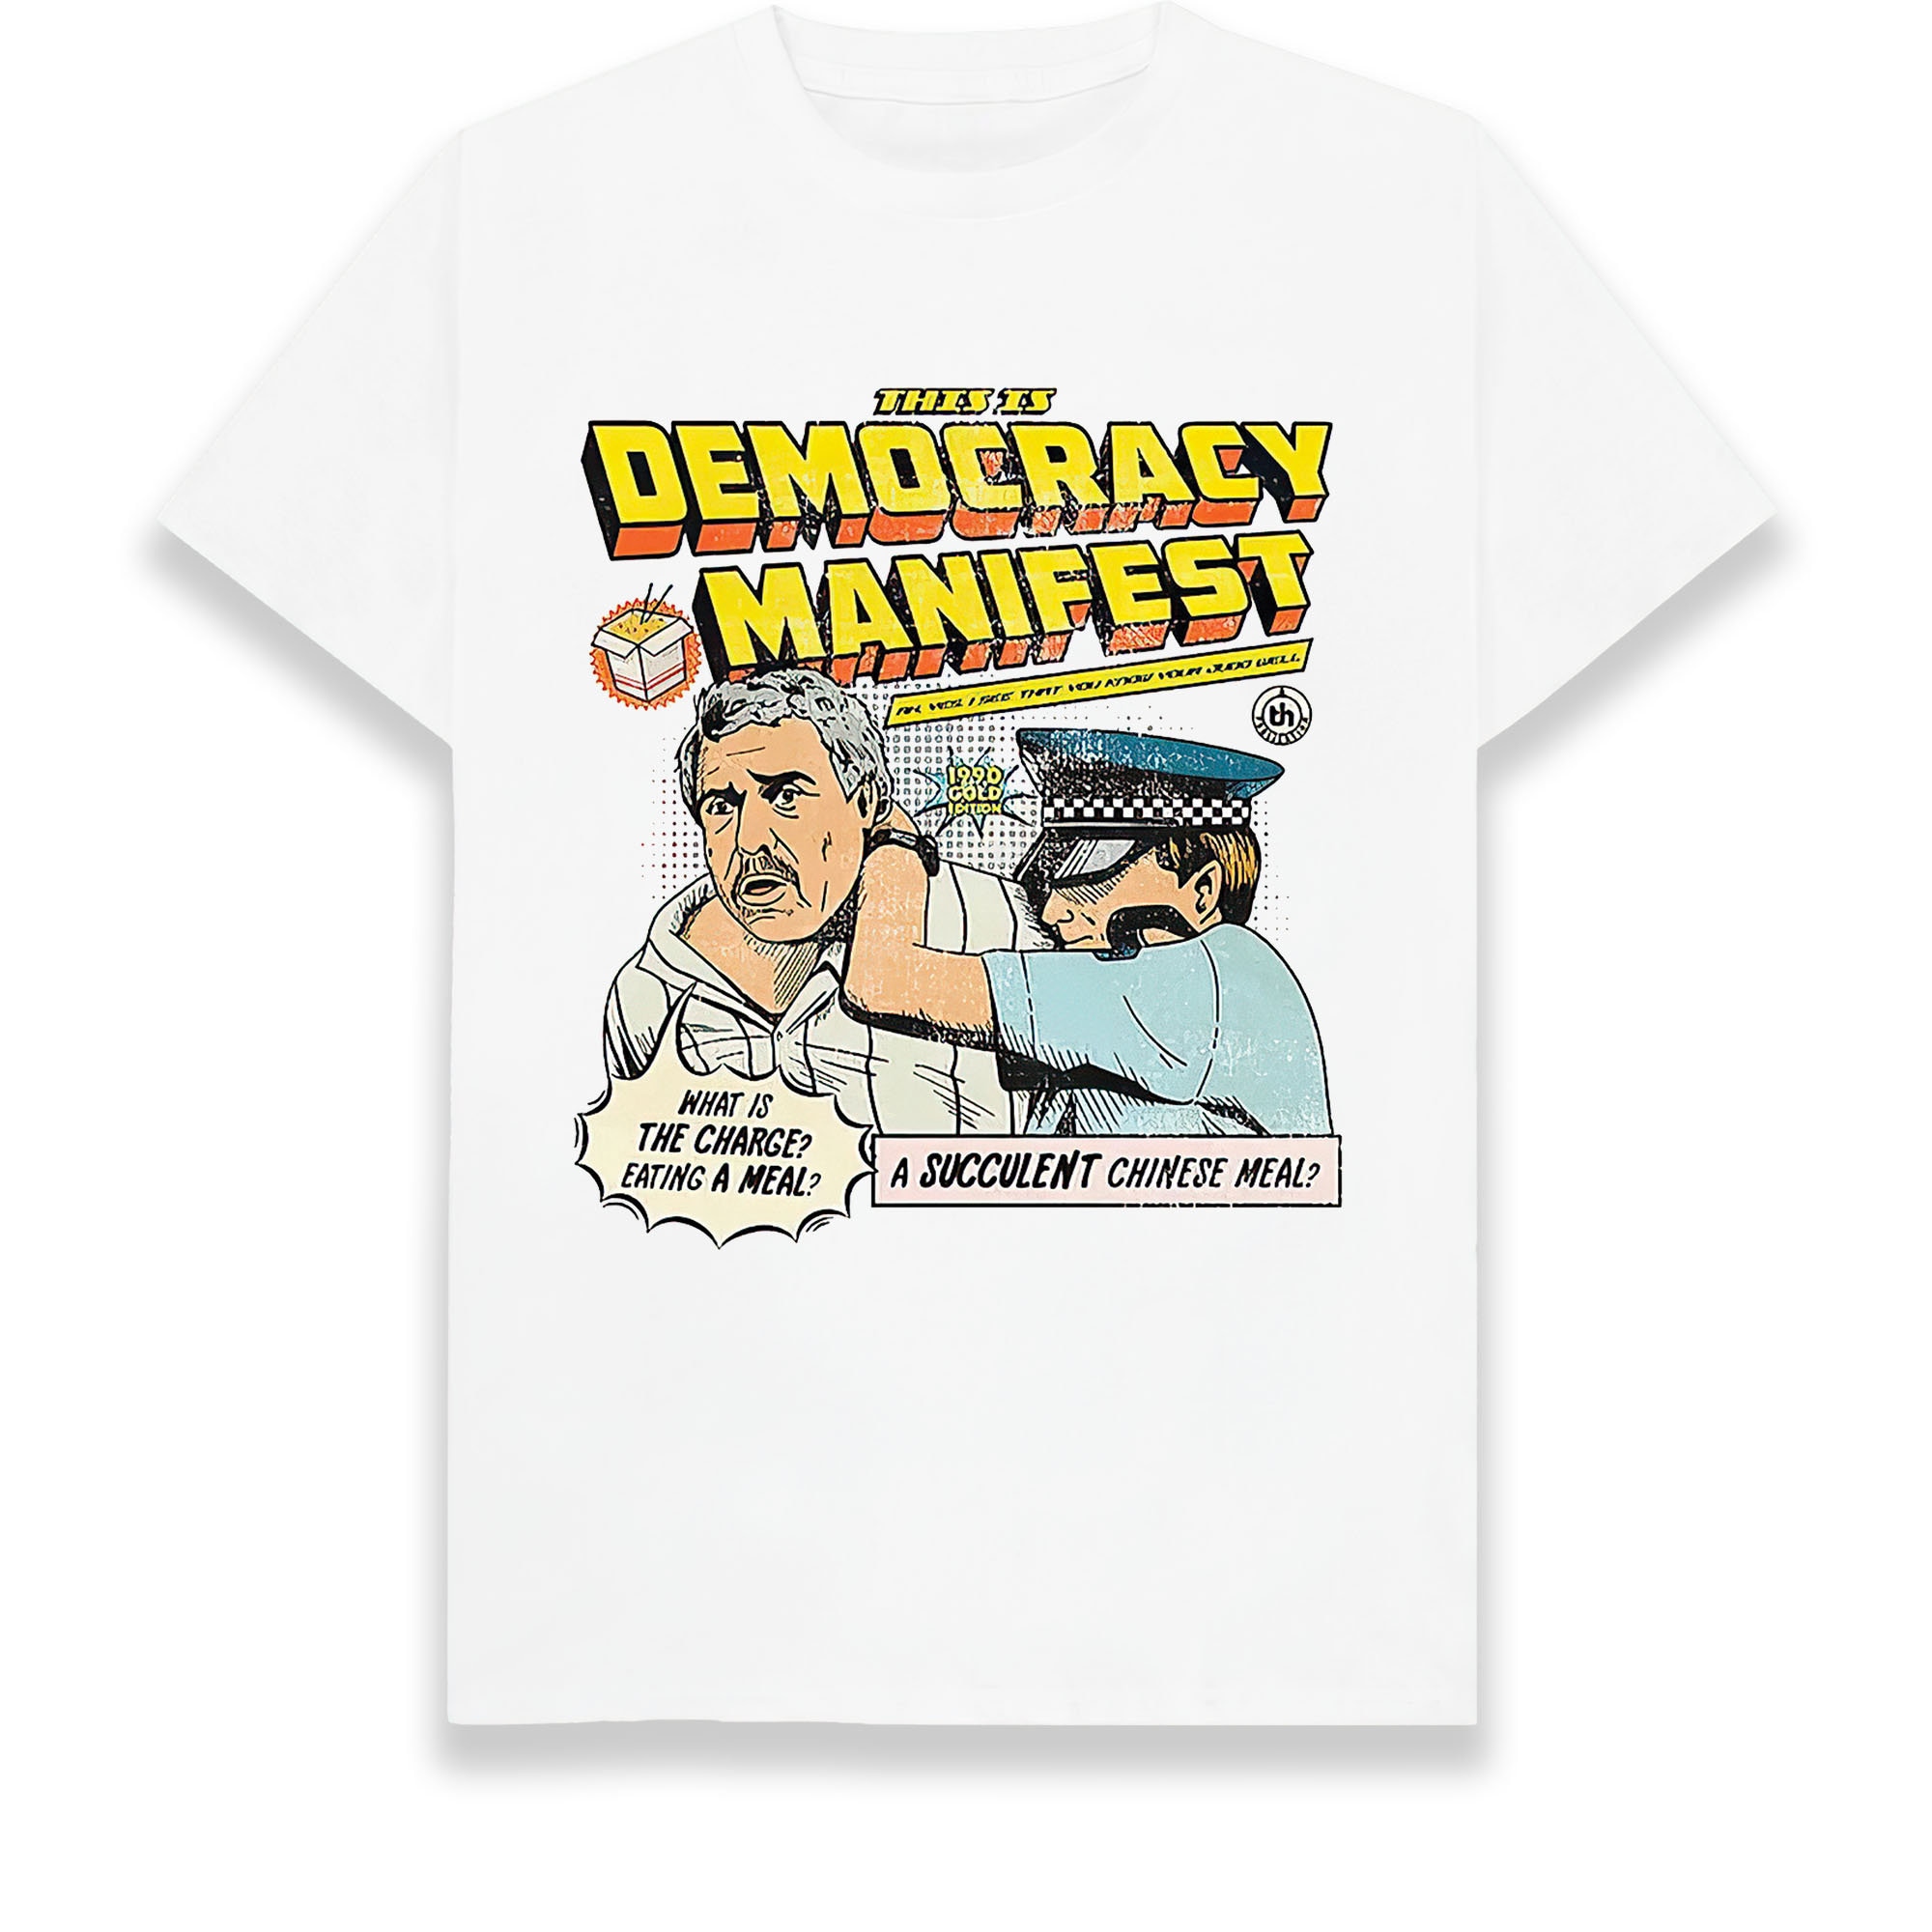 Discover This is Democracy Manifest UK Graphic T-Shirt, Succulent Chinese Meal Funny Meme Unisex Vintage Retro Tee